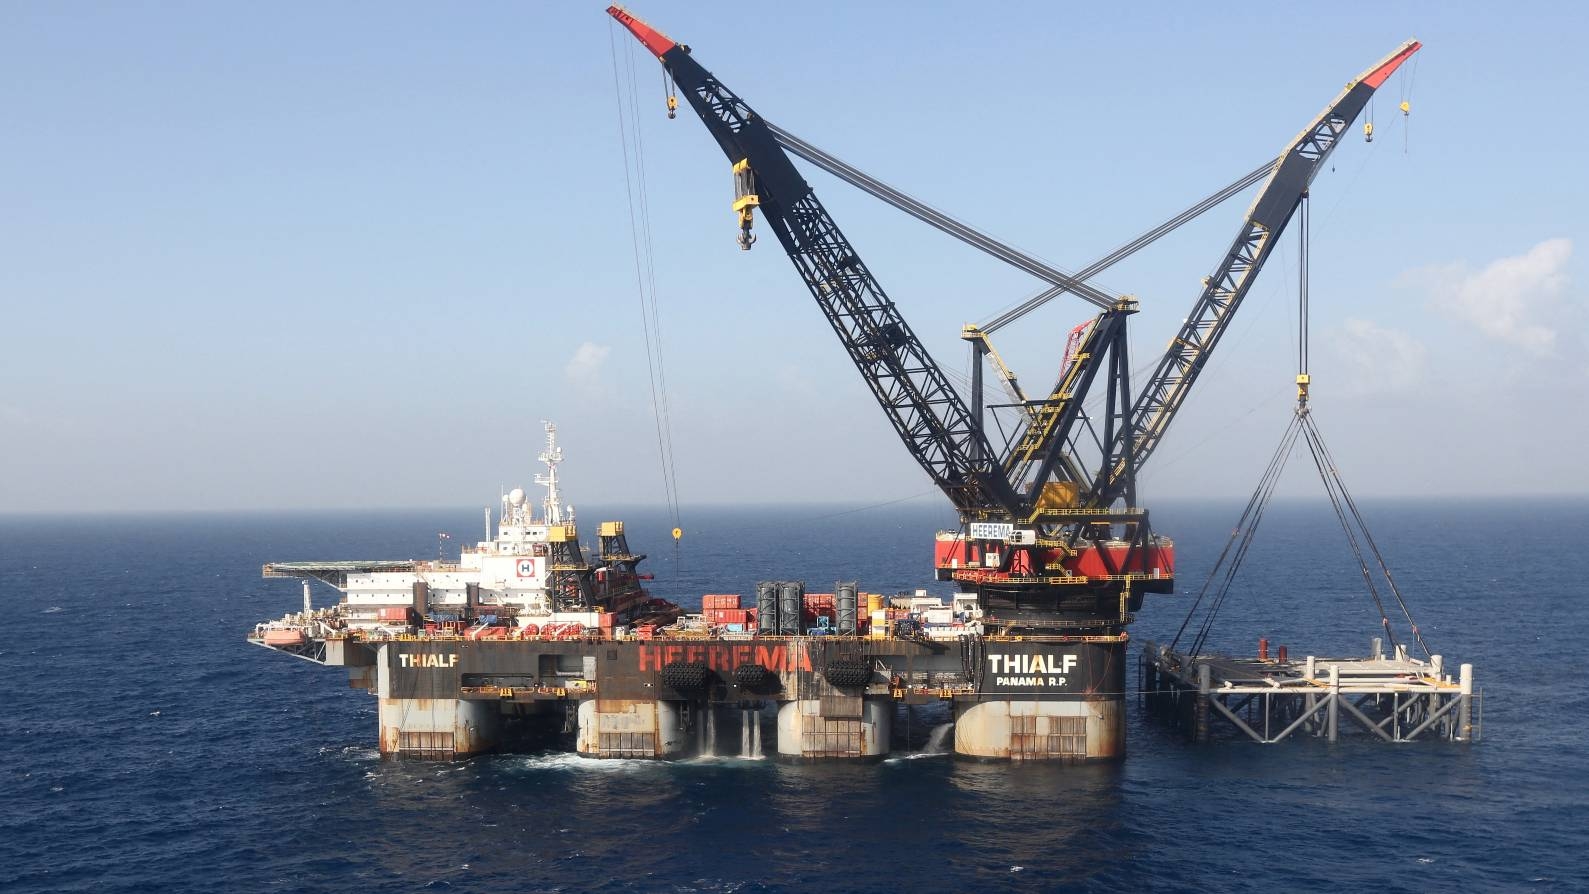 A crane vessel laying the foundation platform for the Leviathan natural gas field in the Mediterranean Sea, 81 miles west of the coast  of the city of Haifa.